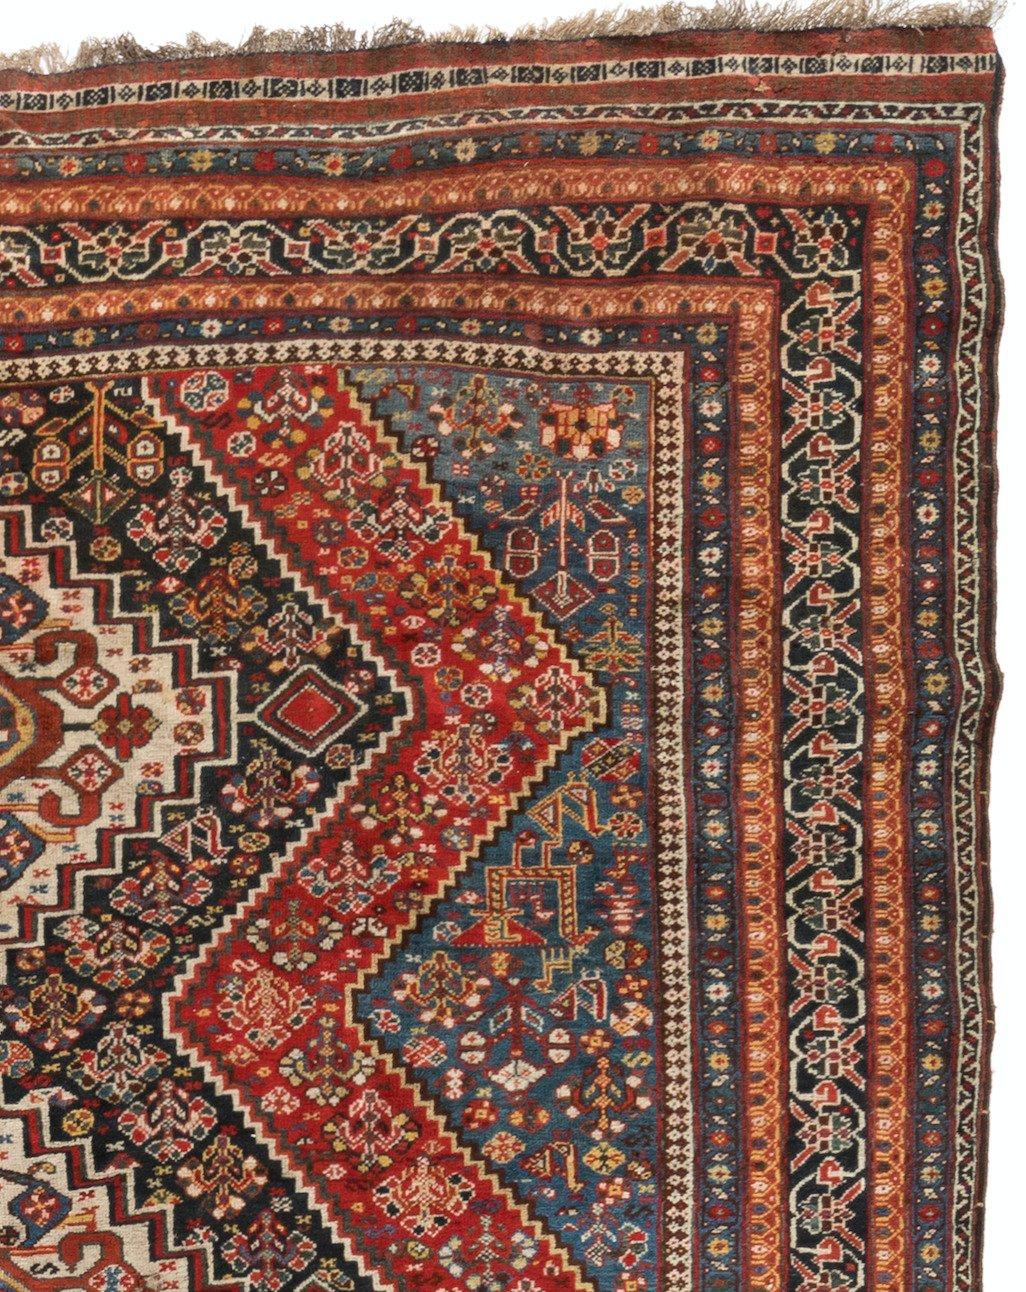 Hand-Knotted Antique Persian Ghashgai Red and Navy Tribal Geometric Rug, circa 1920s 1930s For Sale